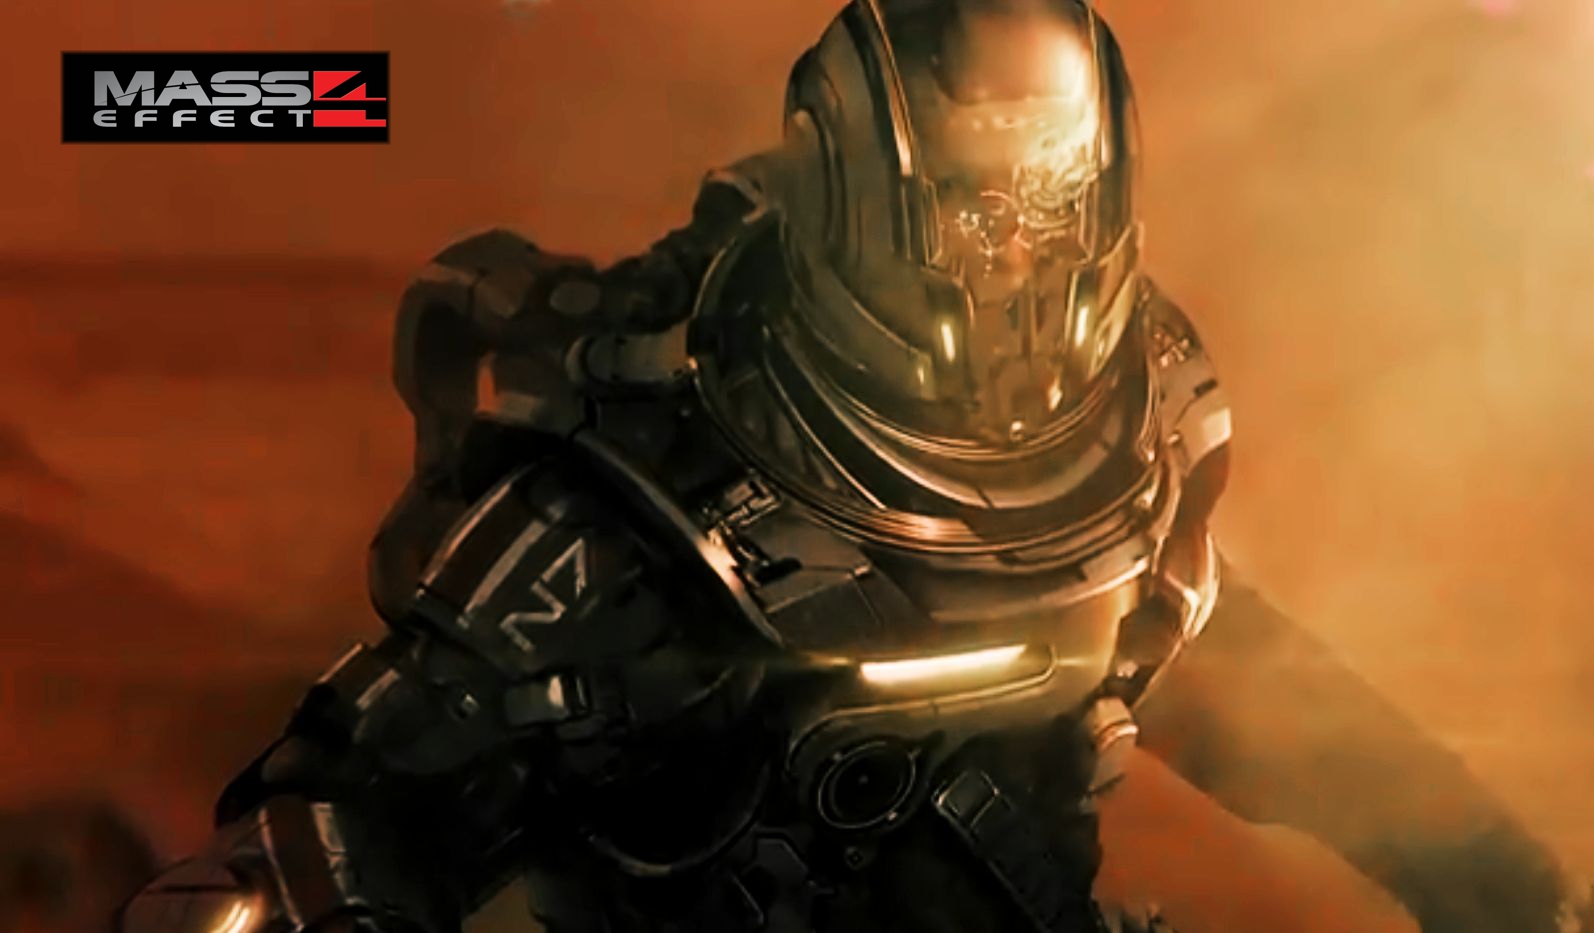 Mass Effect 4 Teaser Video Released At E3 2014